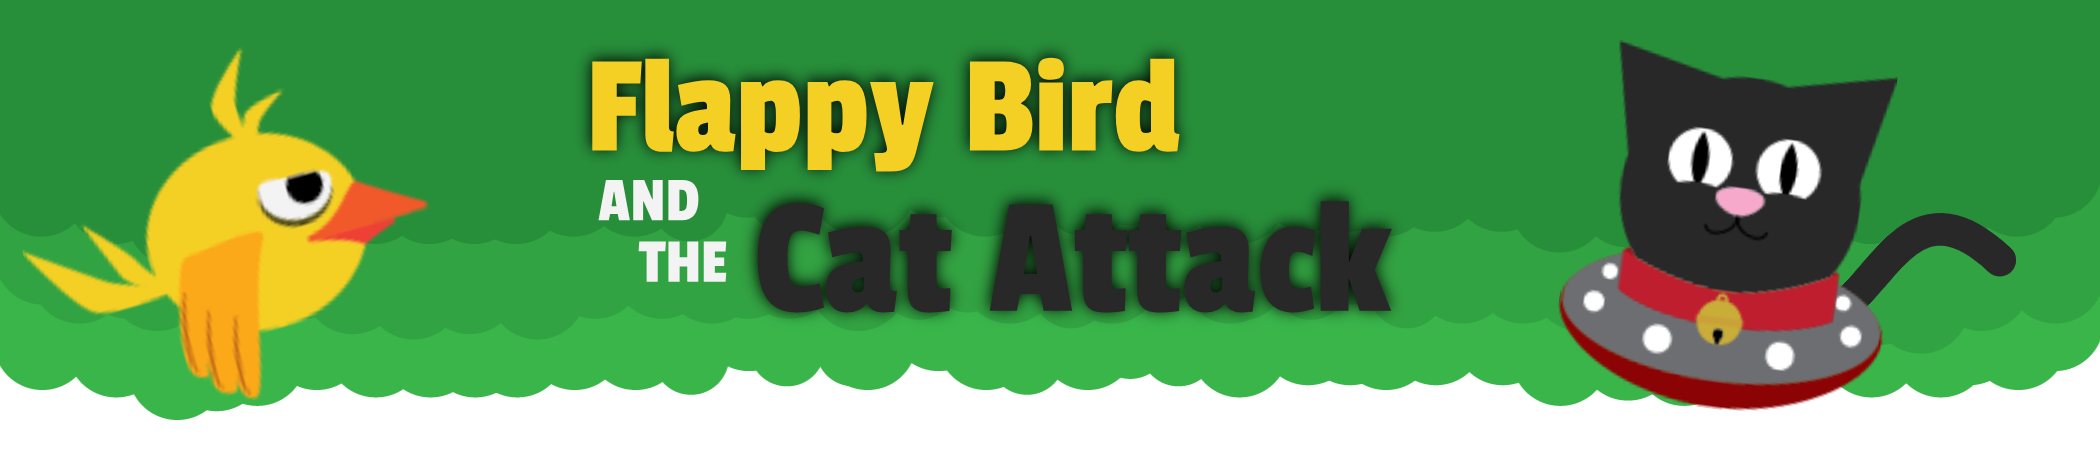 Flappy Bird and the Cat Attack